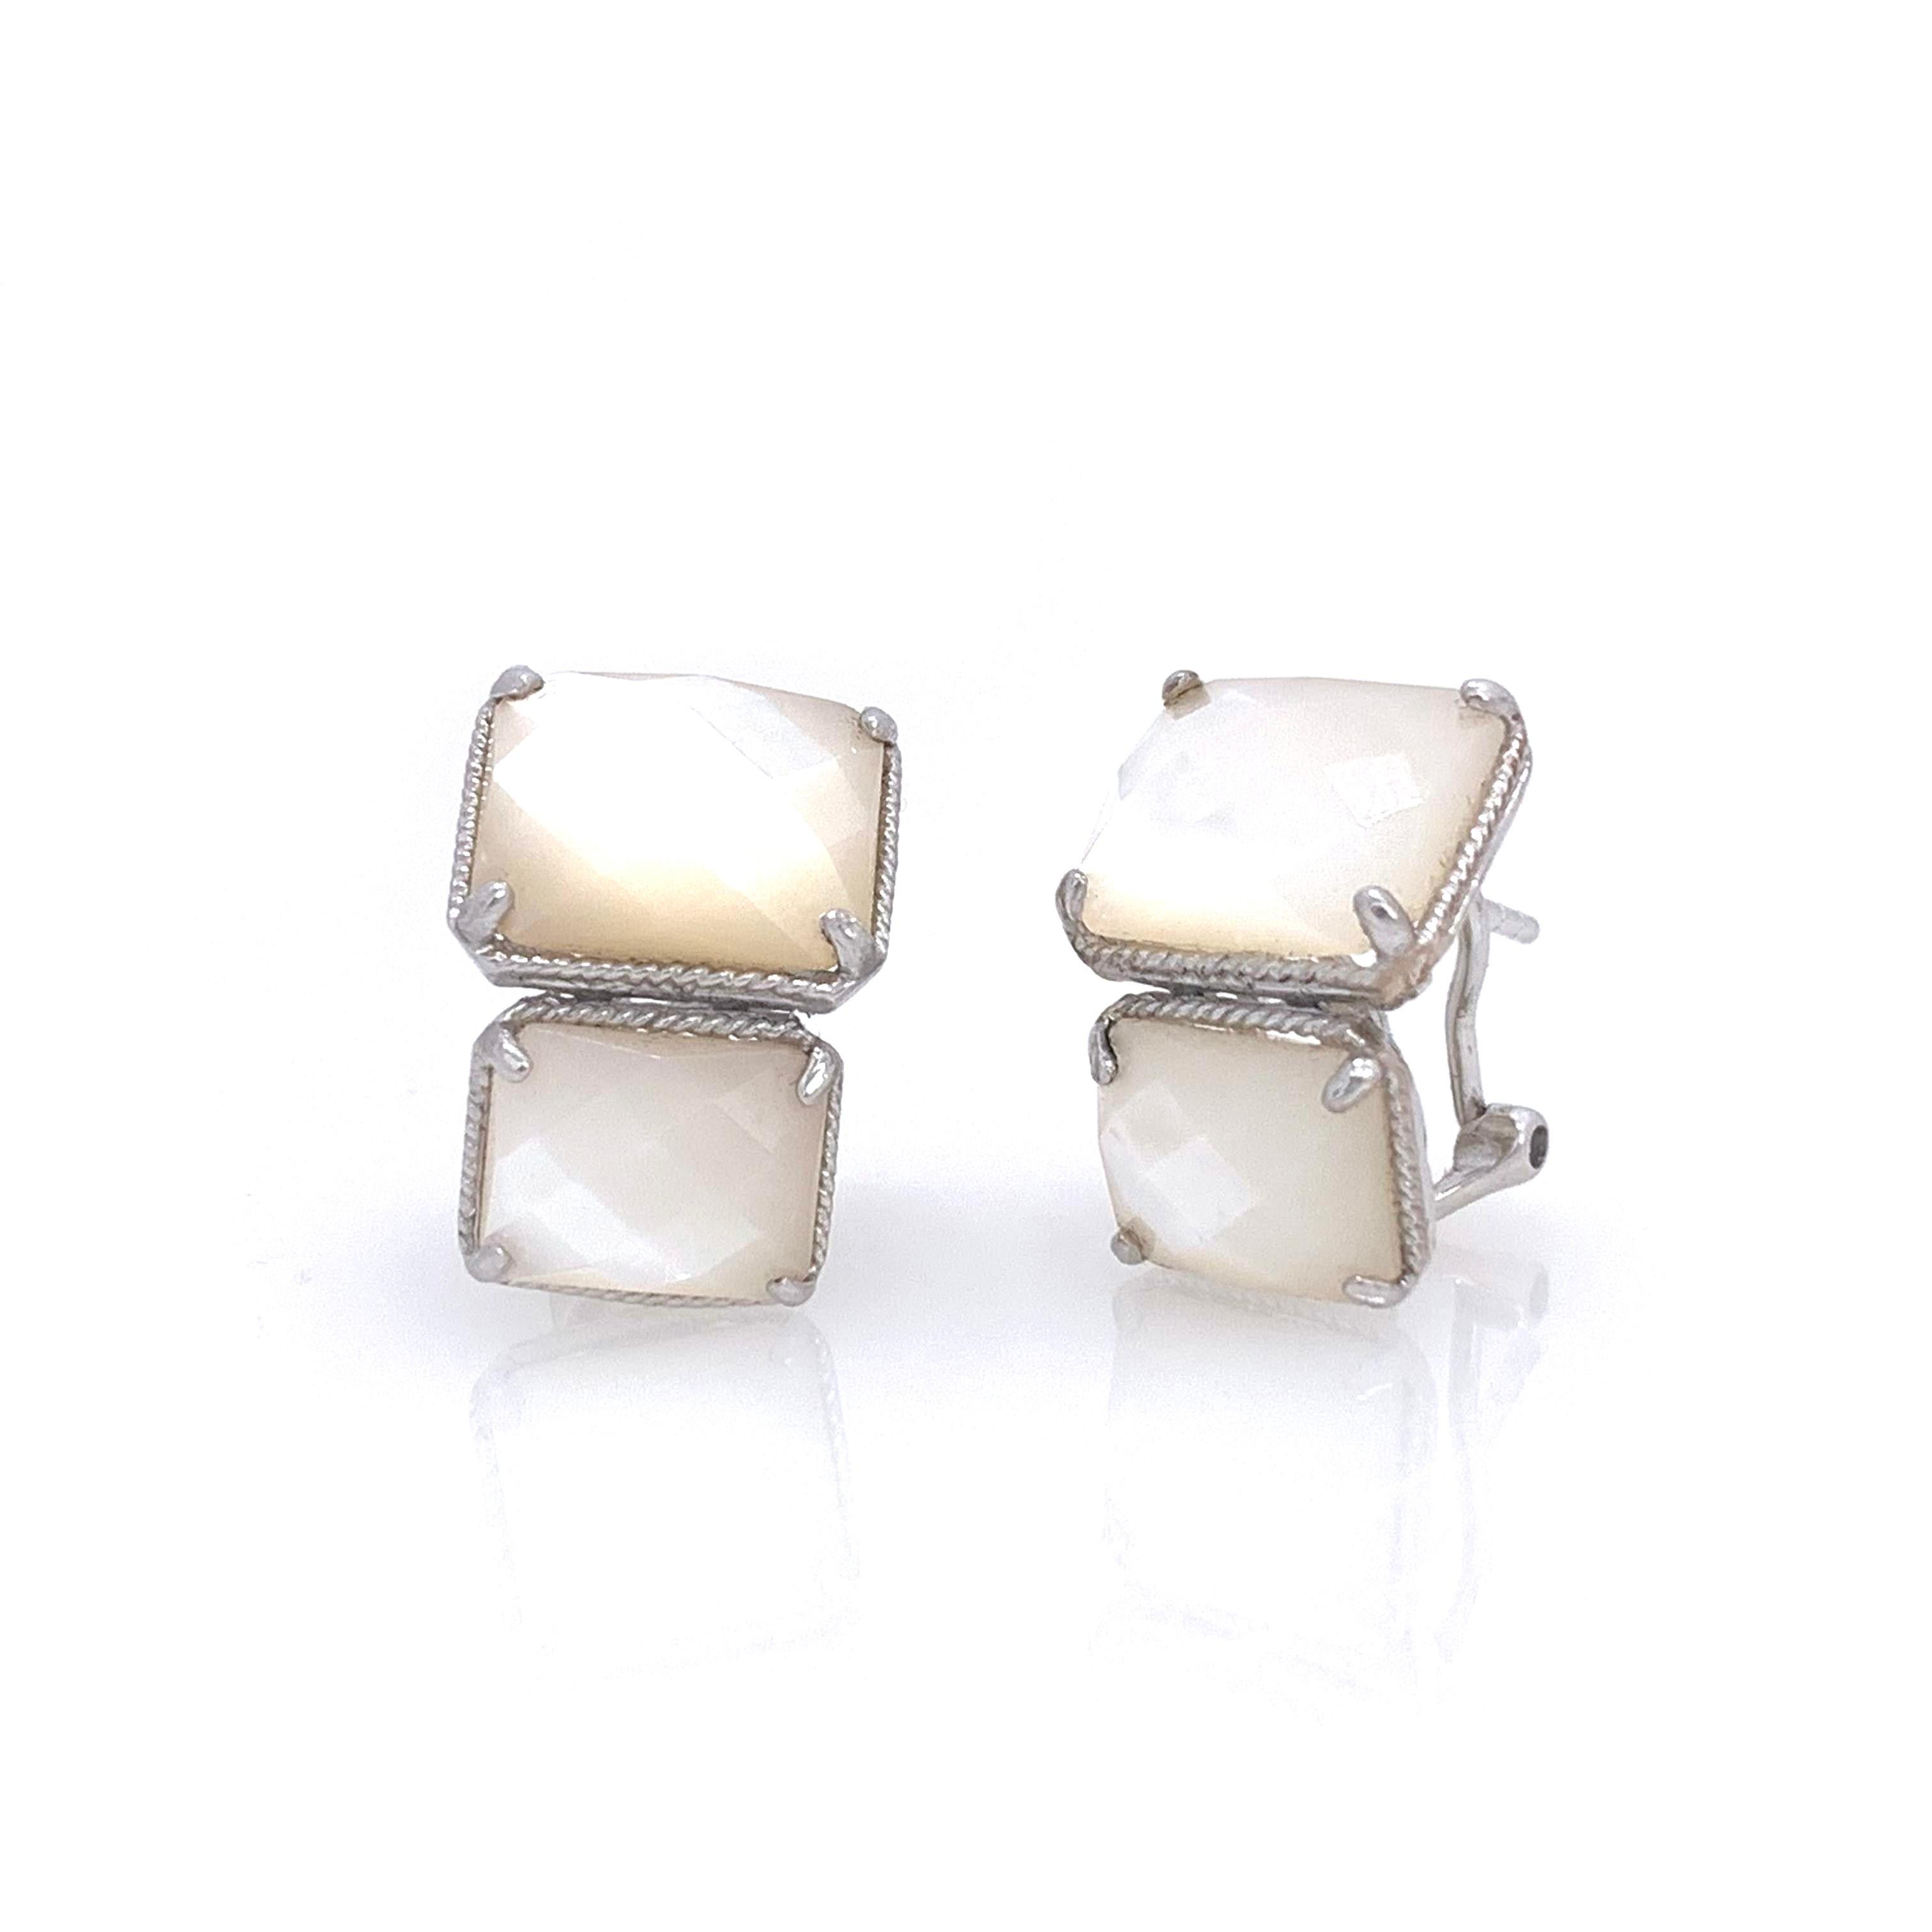 Stunning Bijoux Num Double Octagon Mother of Pearl Sterling Silver Earrings. 

The earrings feature 4 luminous briolette-cut mother of pearl, handset in platinum rhodium plated over sterling silver.  Straight post back with omega clip backing. The